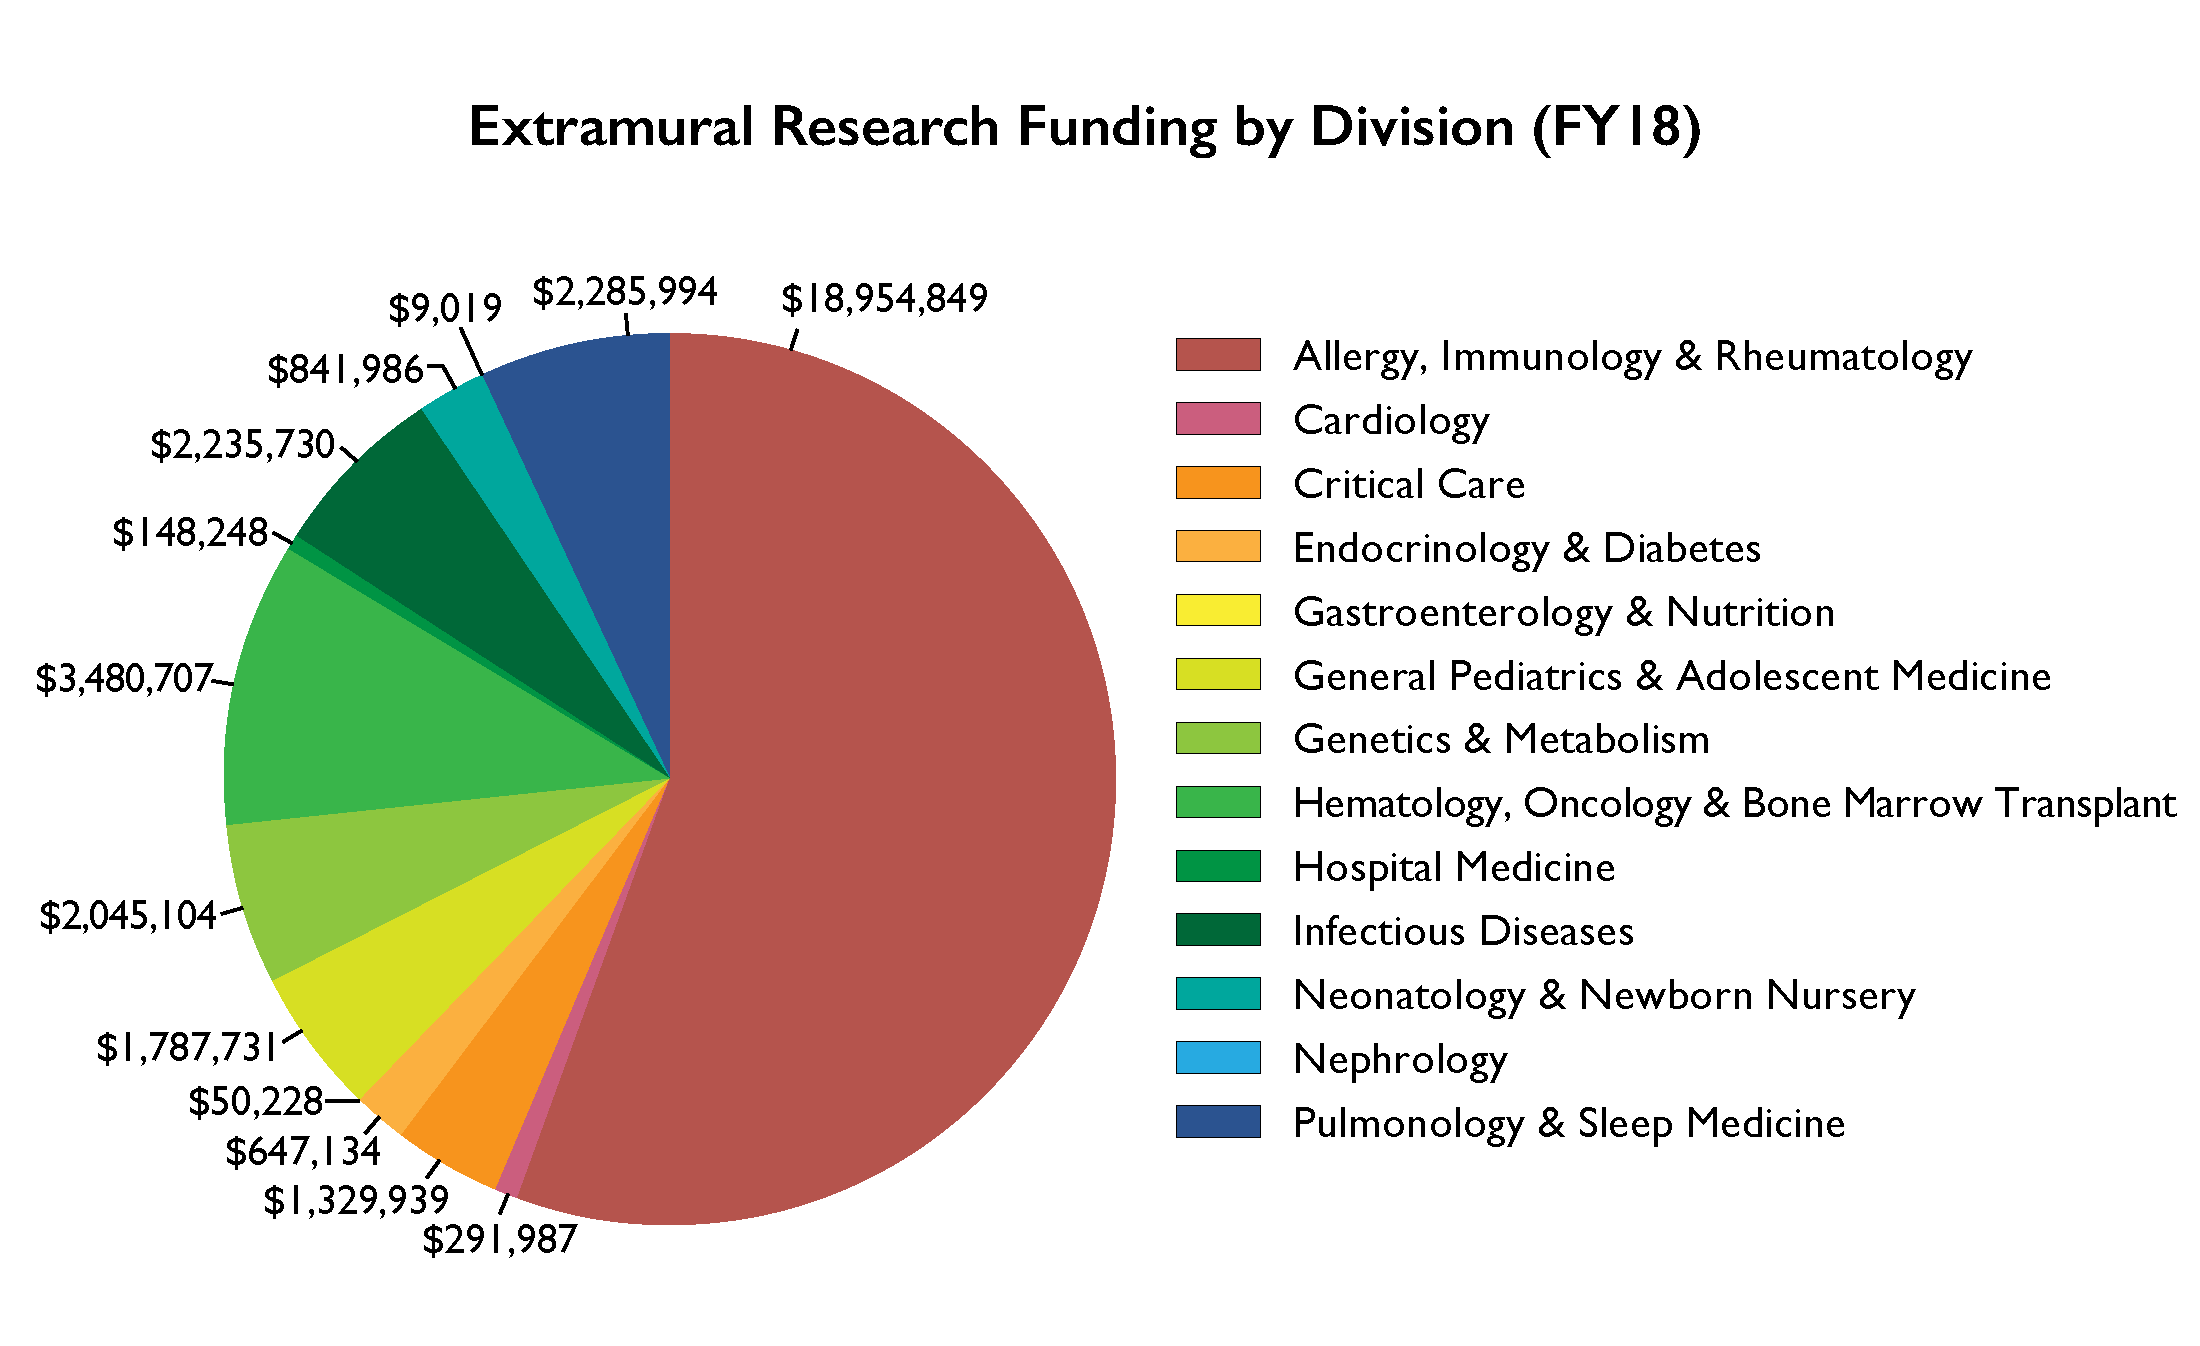 Extramural Research Funding by Division AR 2018 pie chart